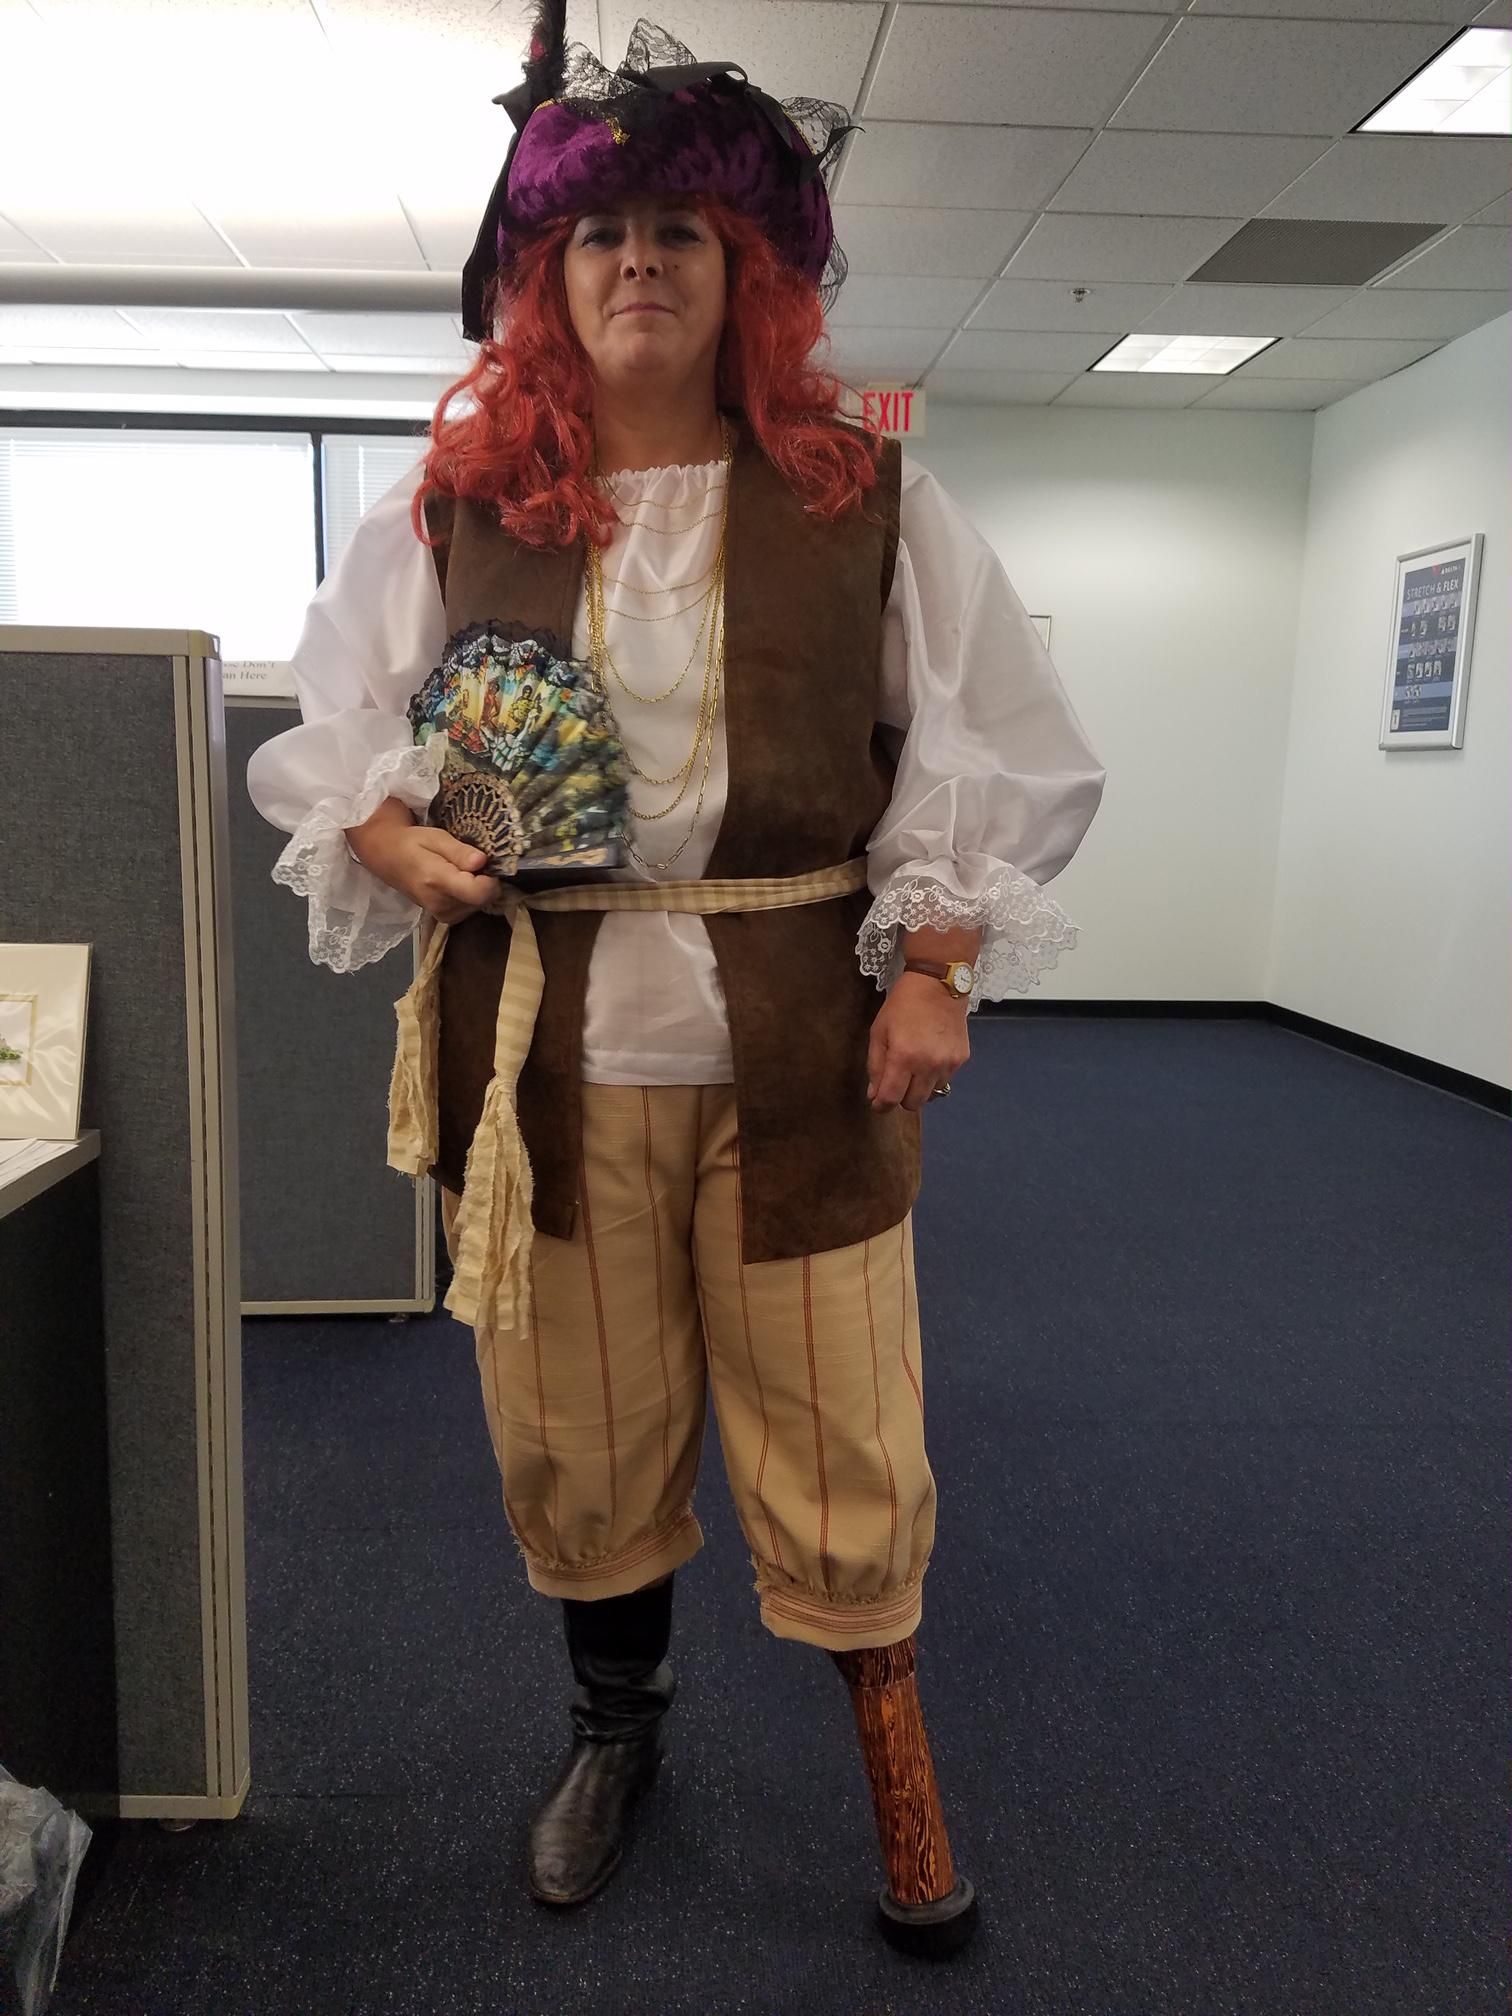 My co-worker is an amputee. This was her costume.